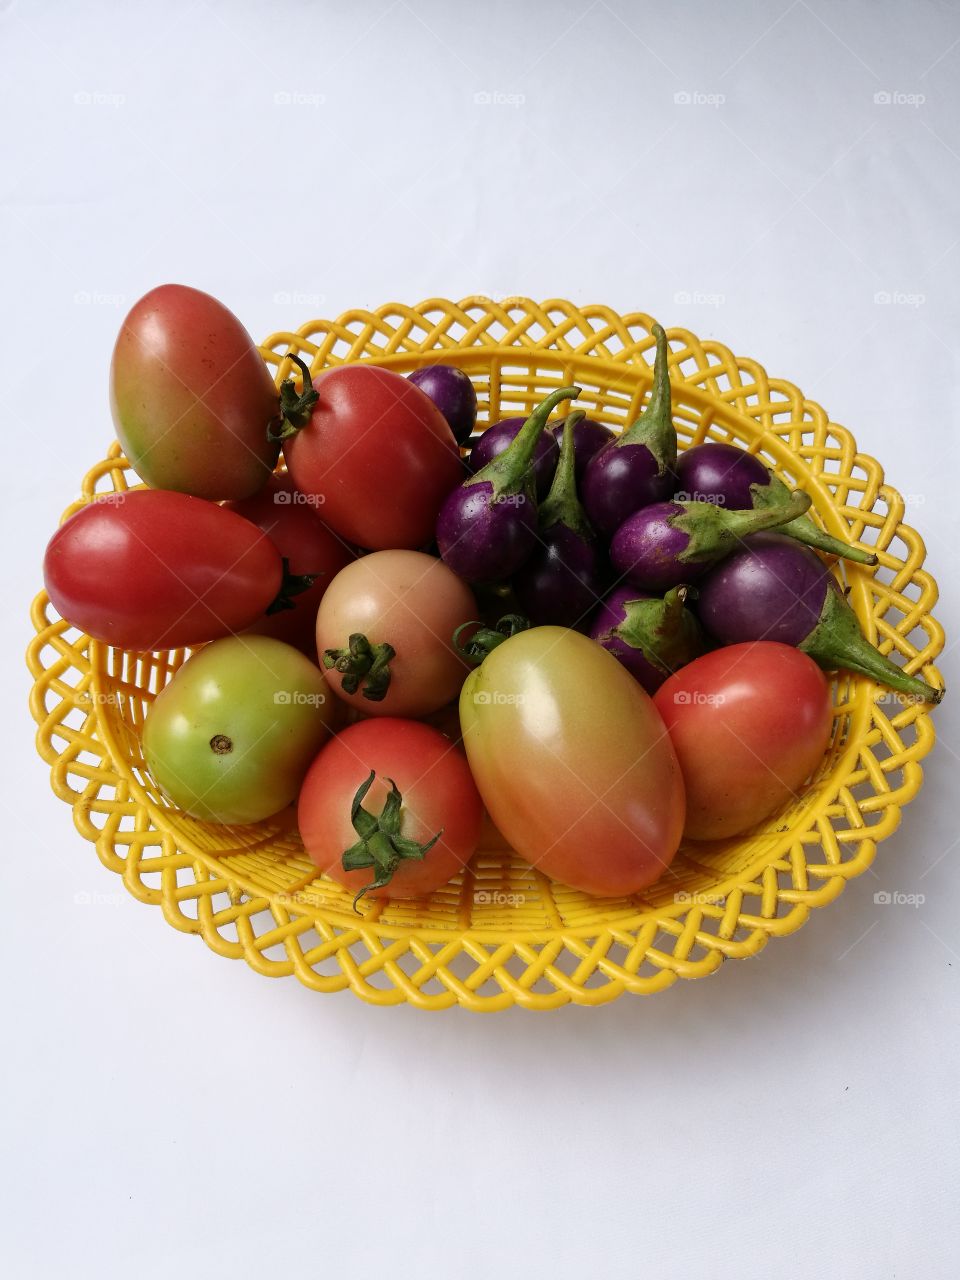 tomatoes and eggplants in basket